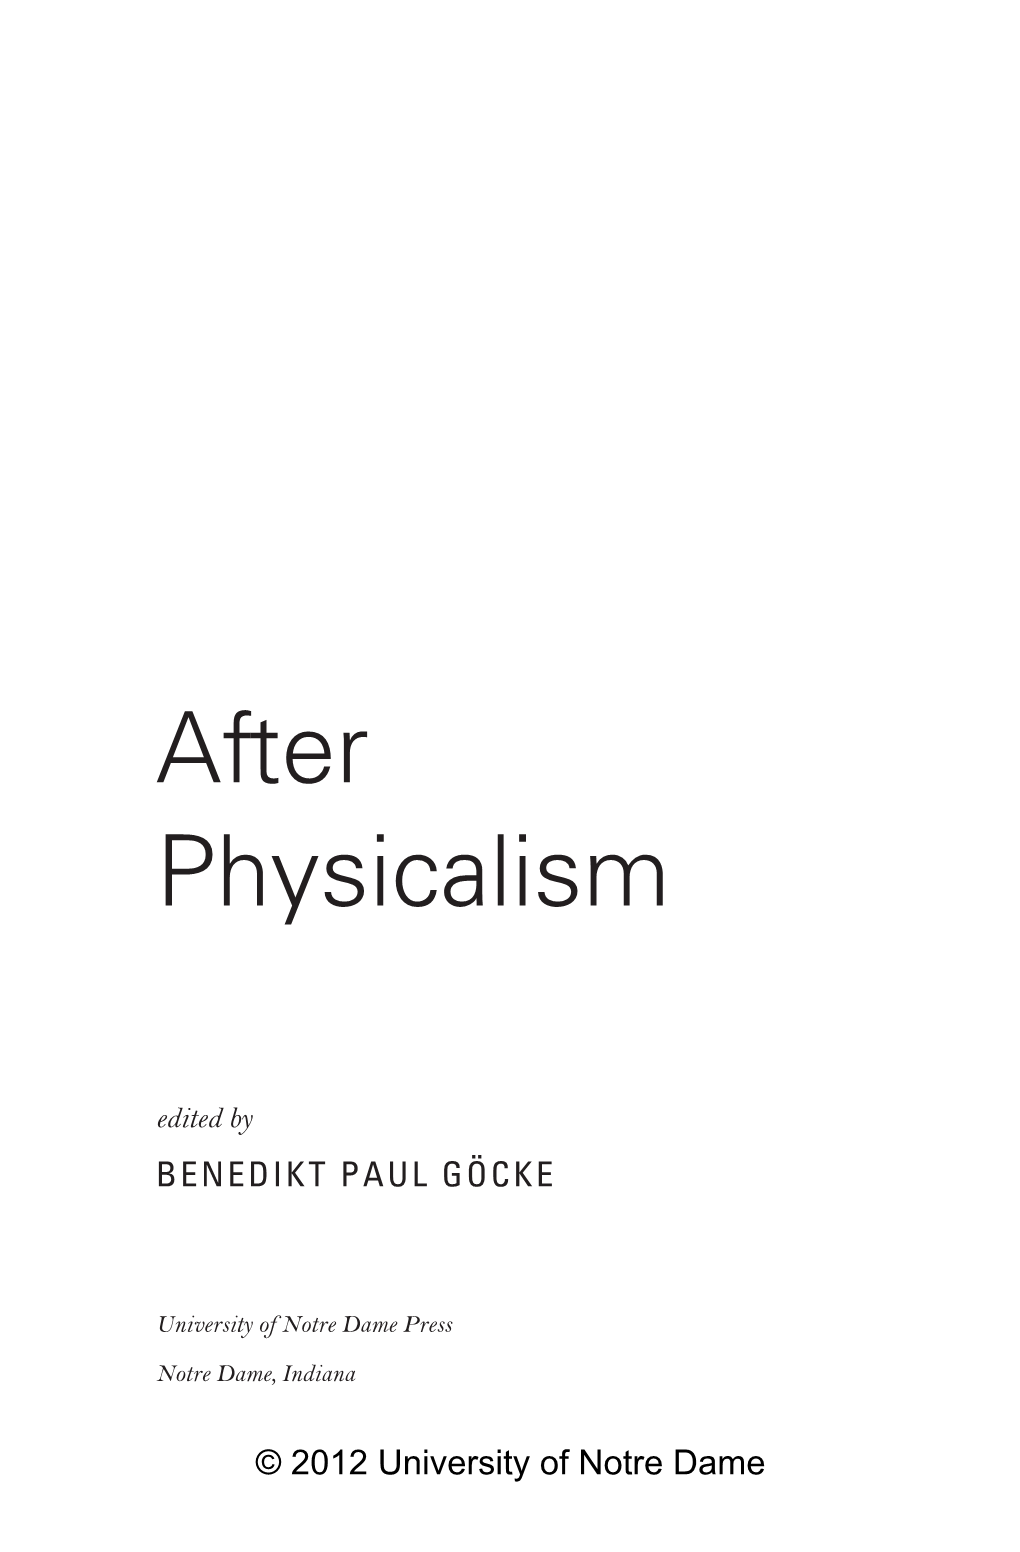 After Physicalism